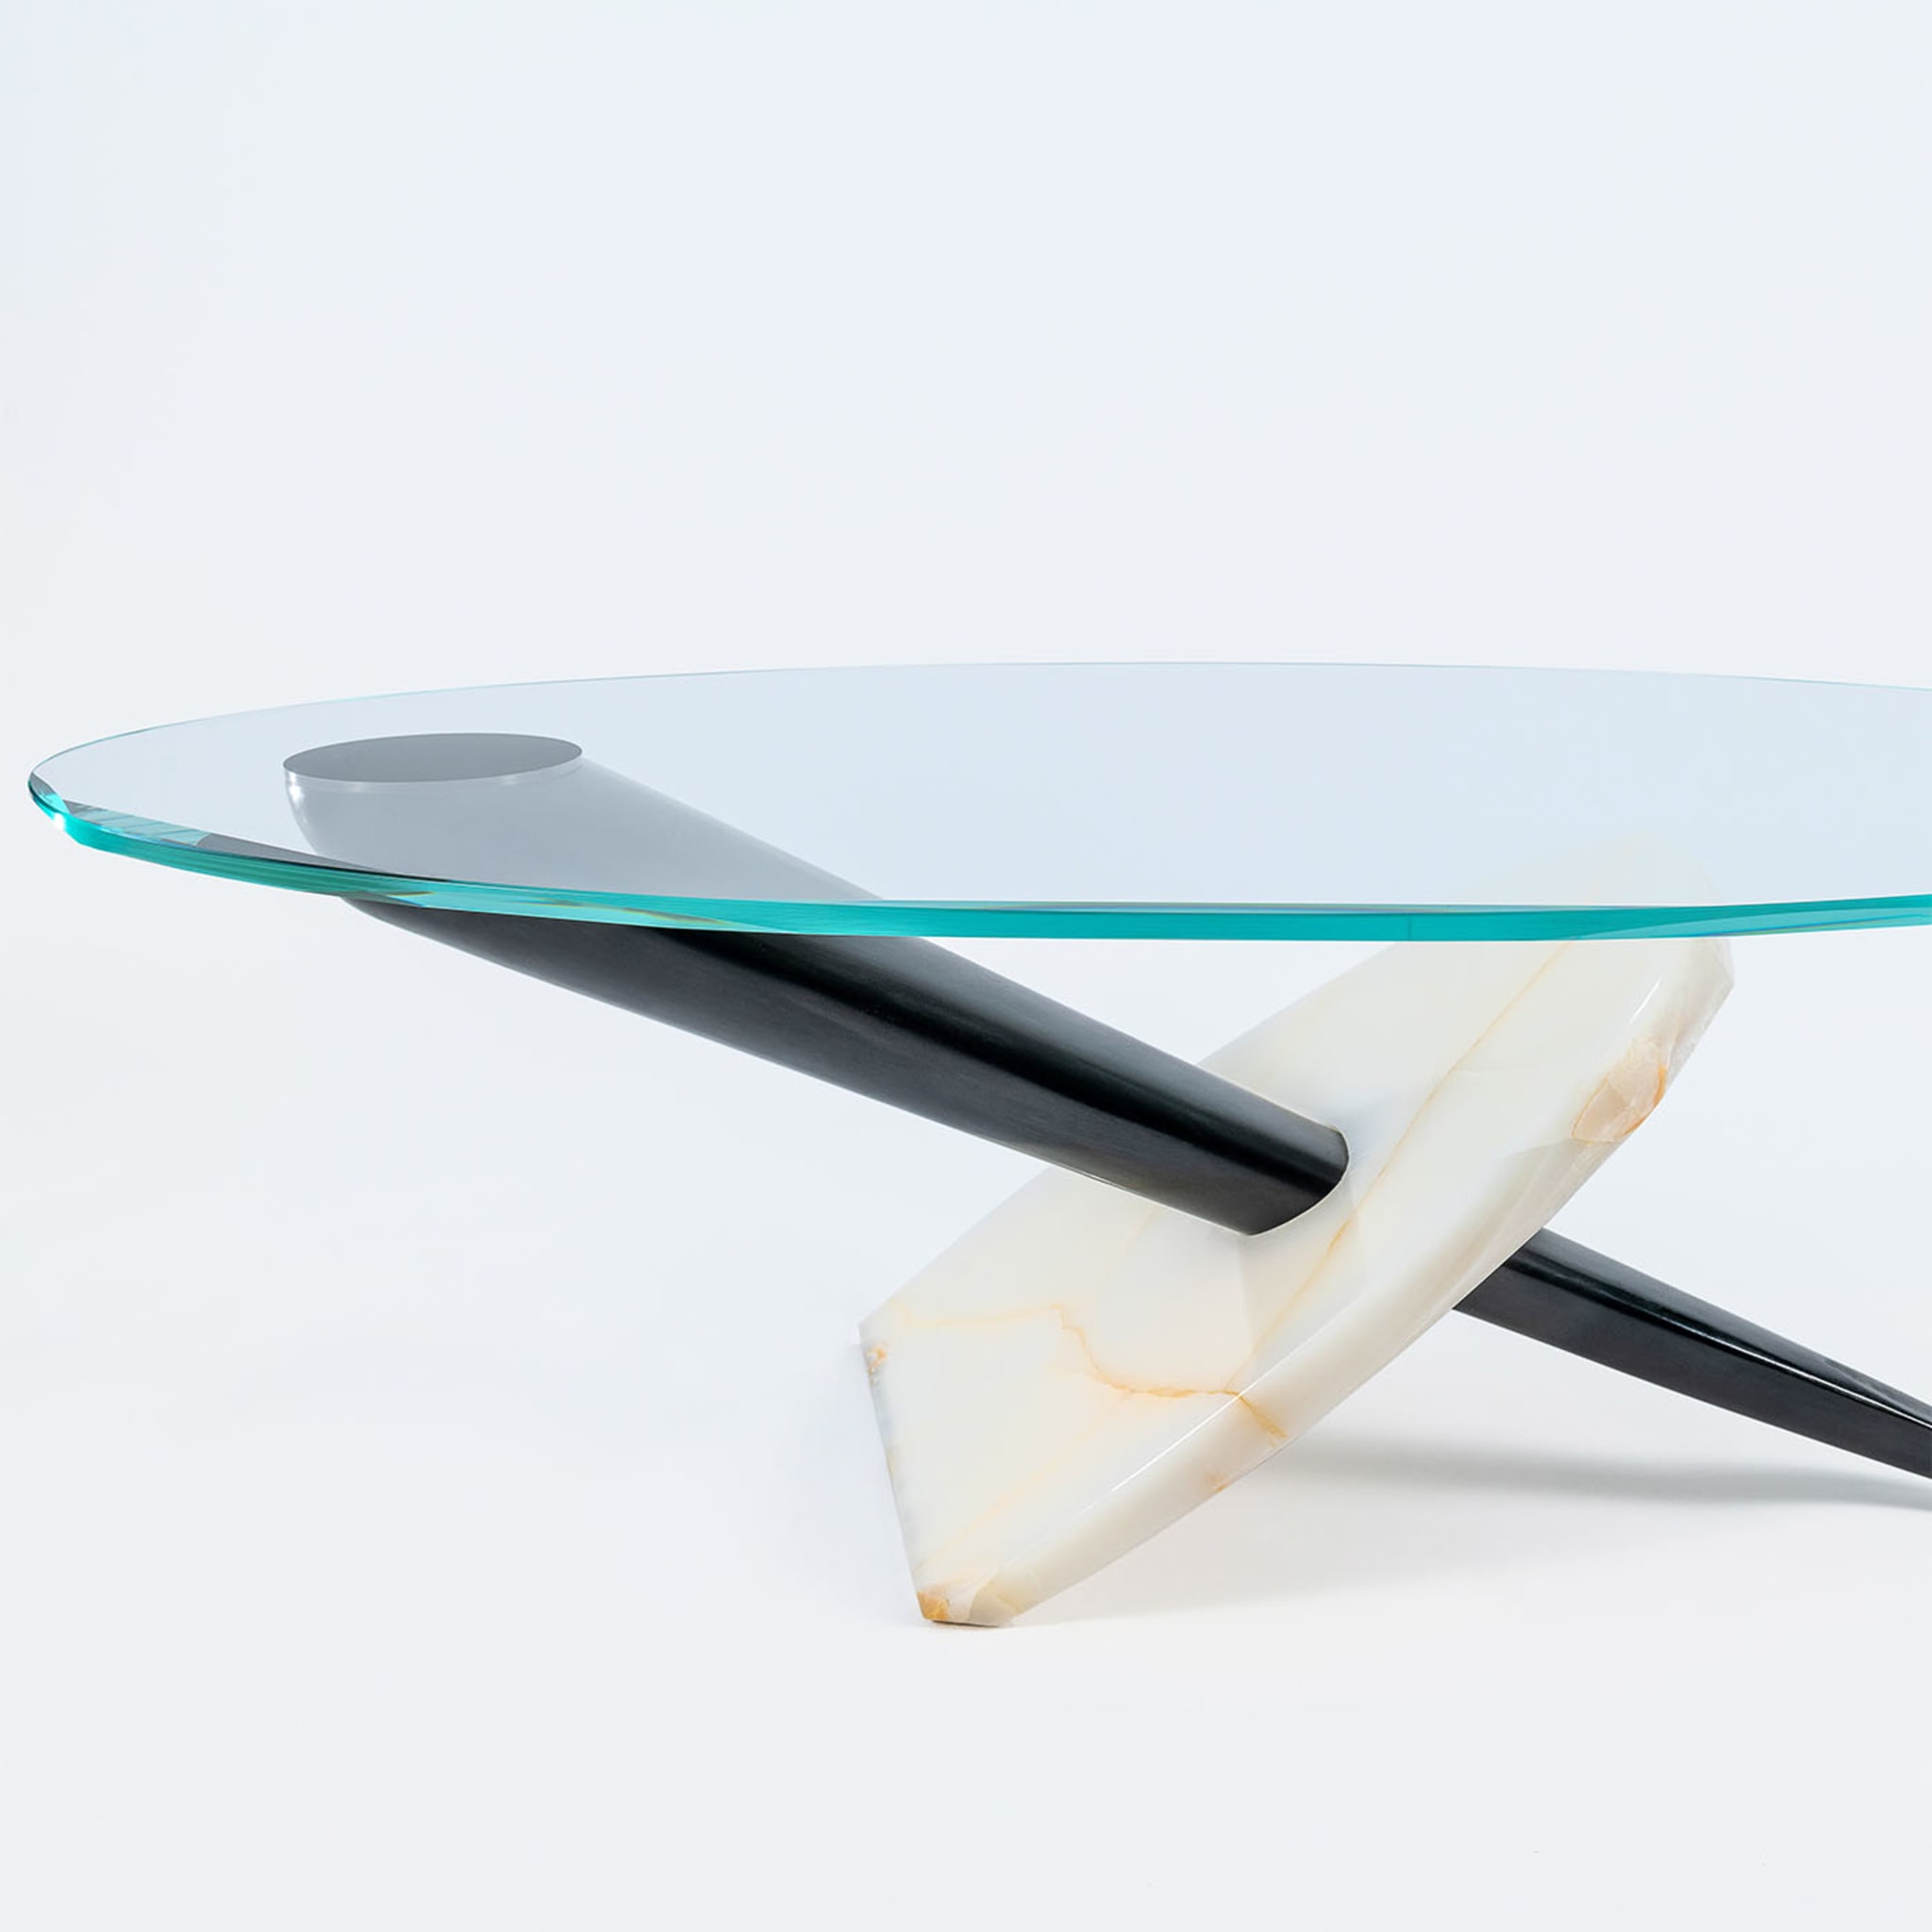 Gerione Oval Coffee Table - Alternative view 3